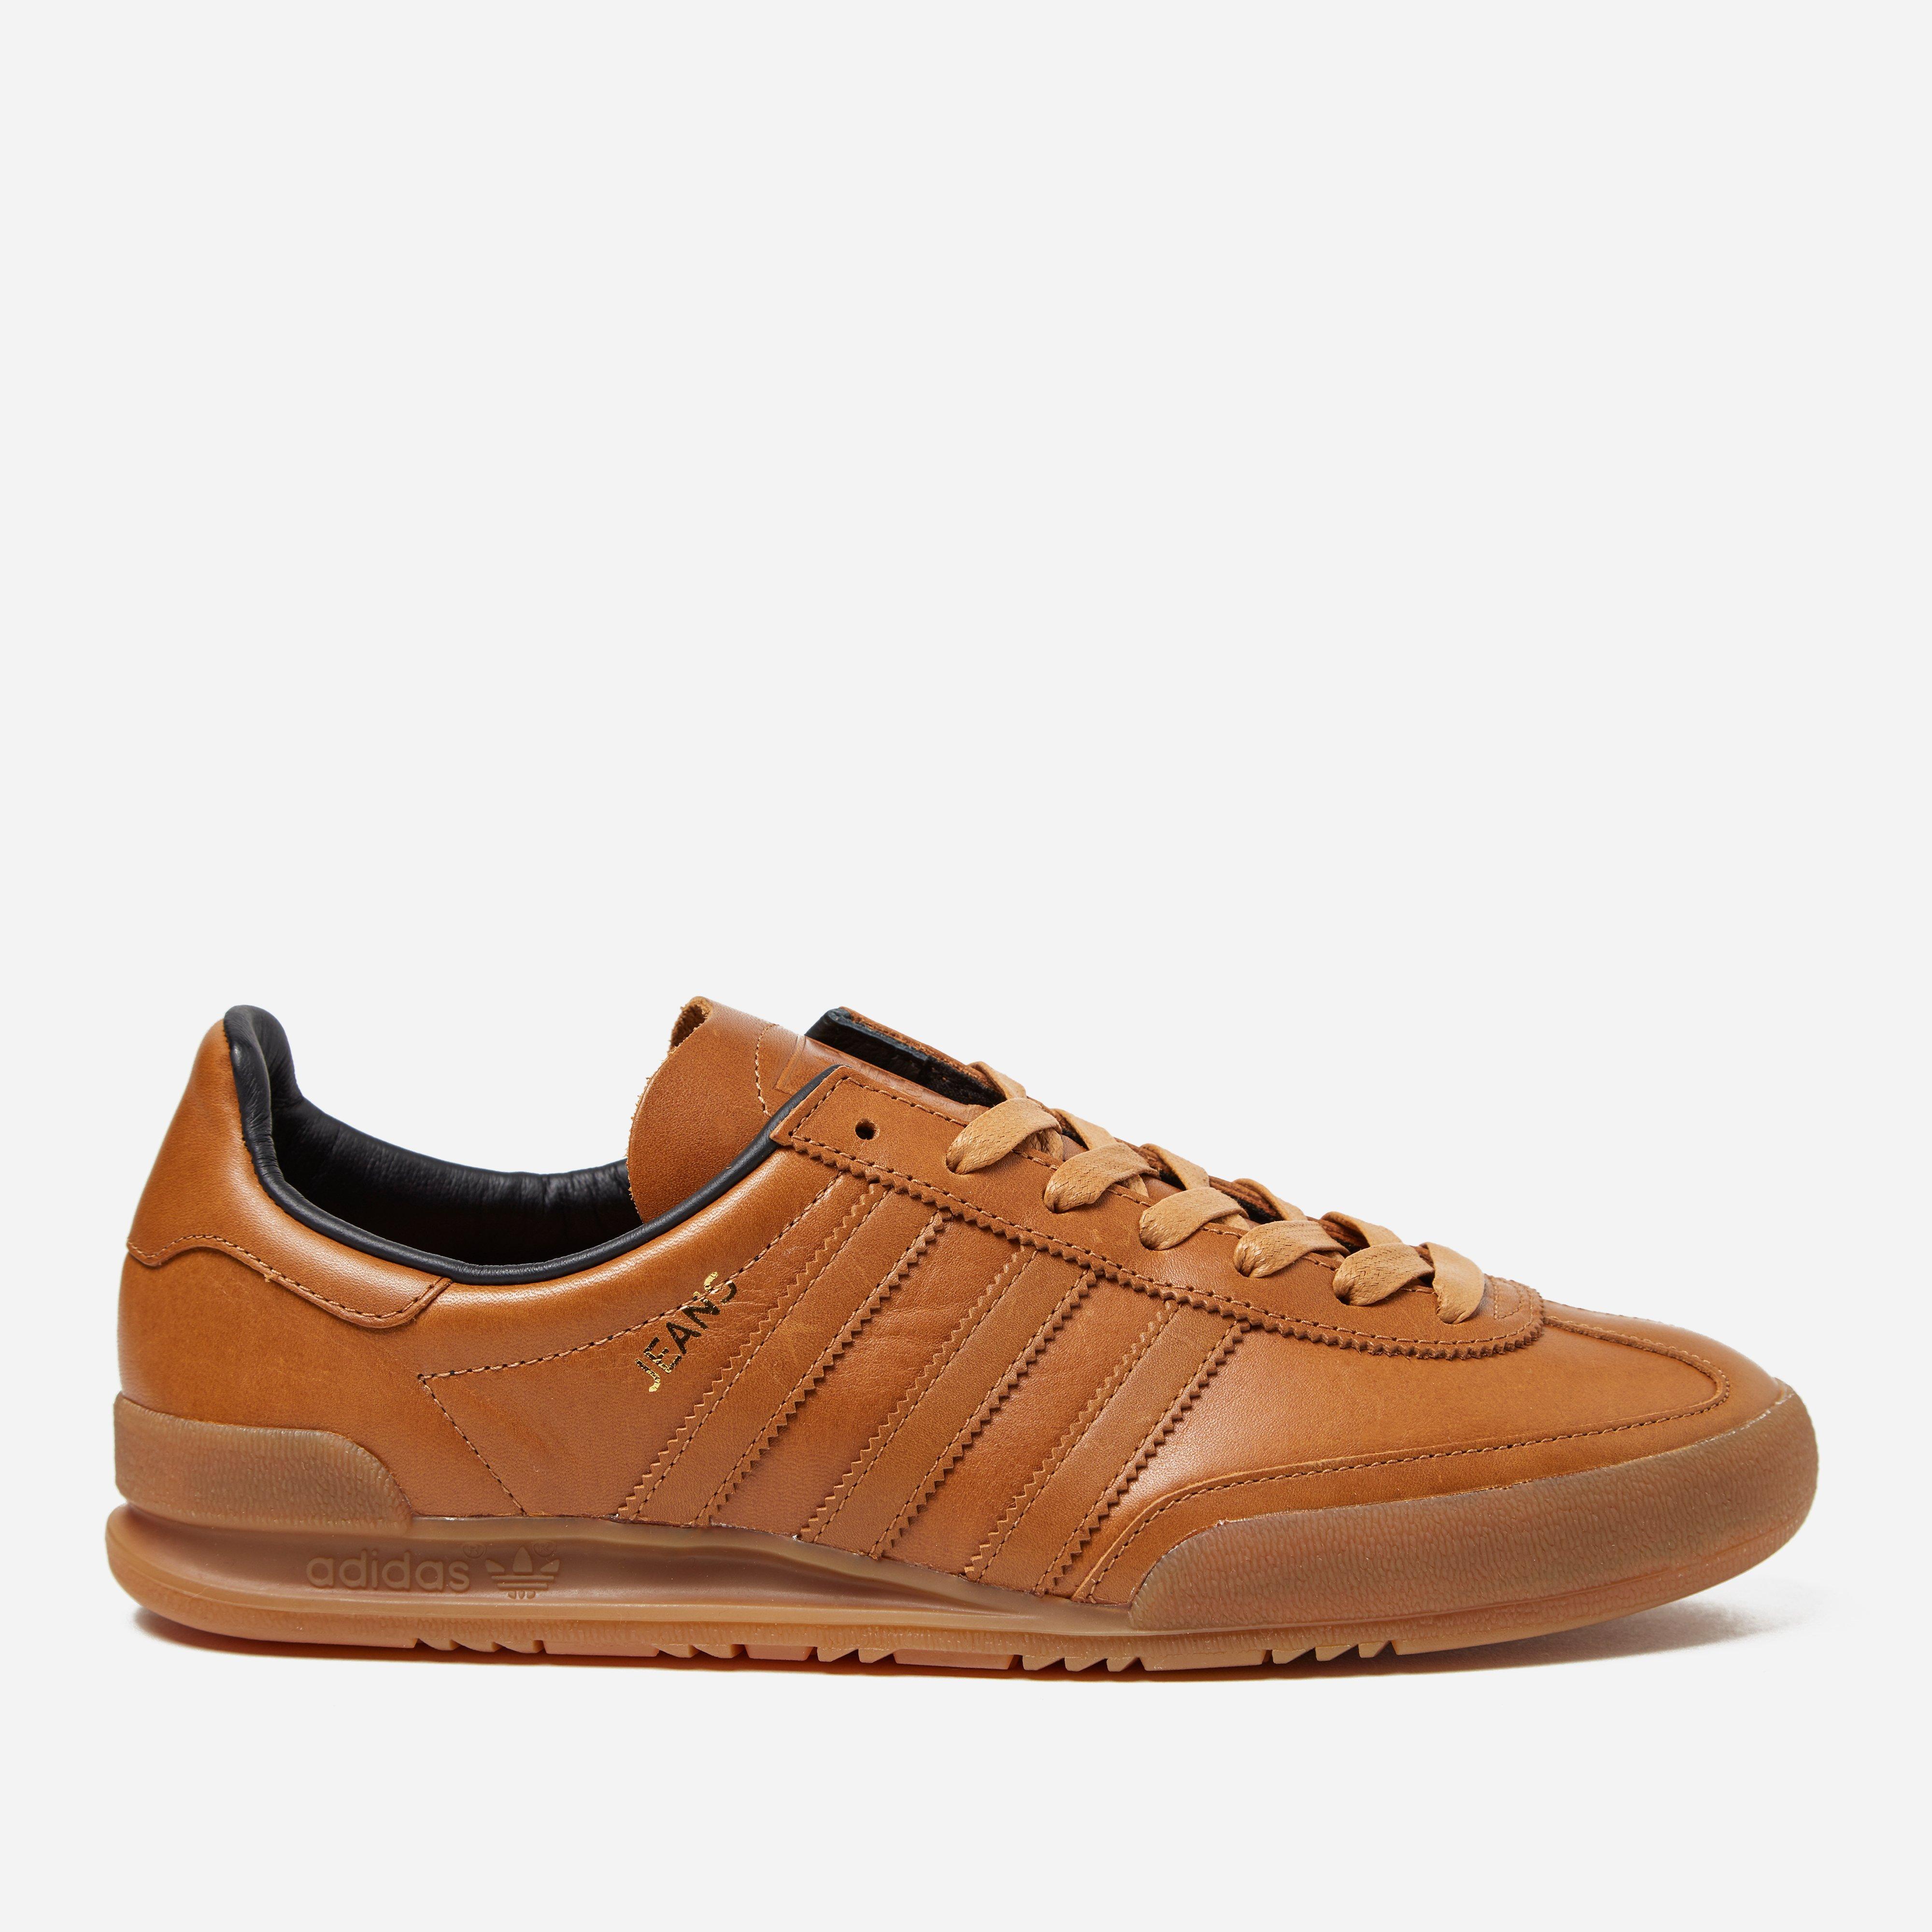 adidas jeans brown leather